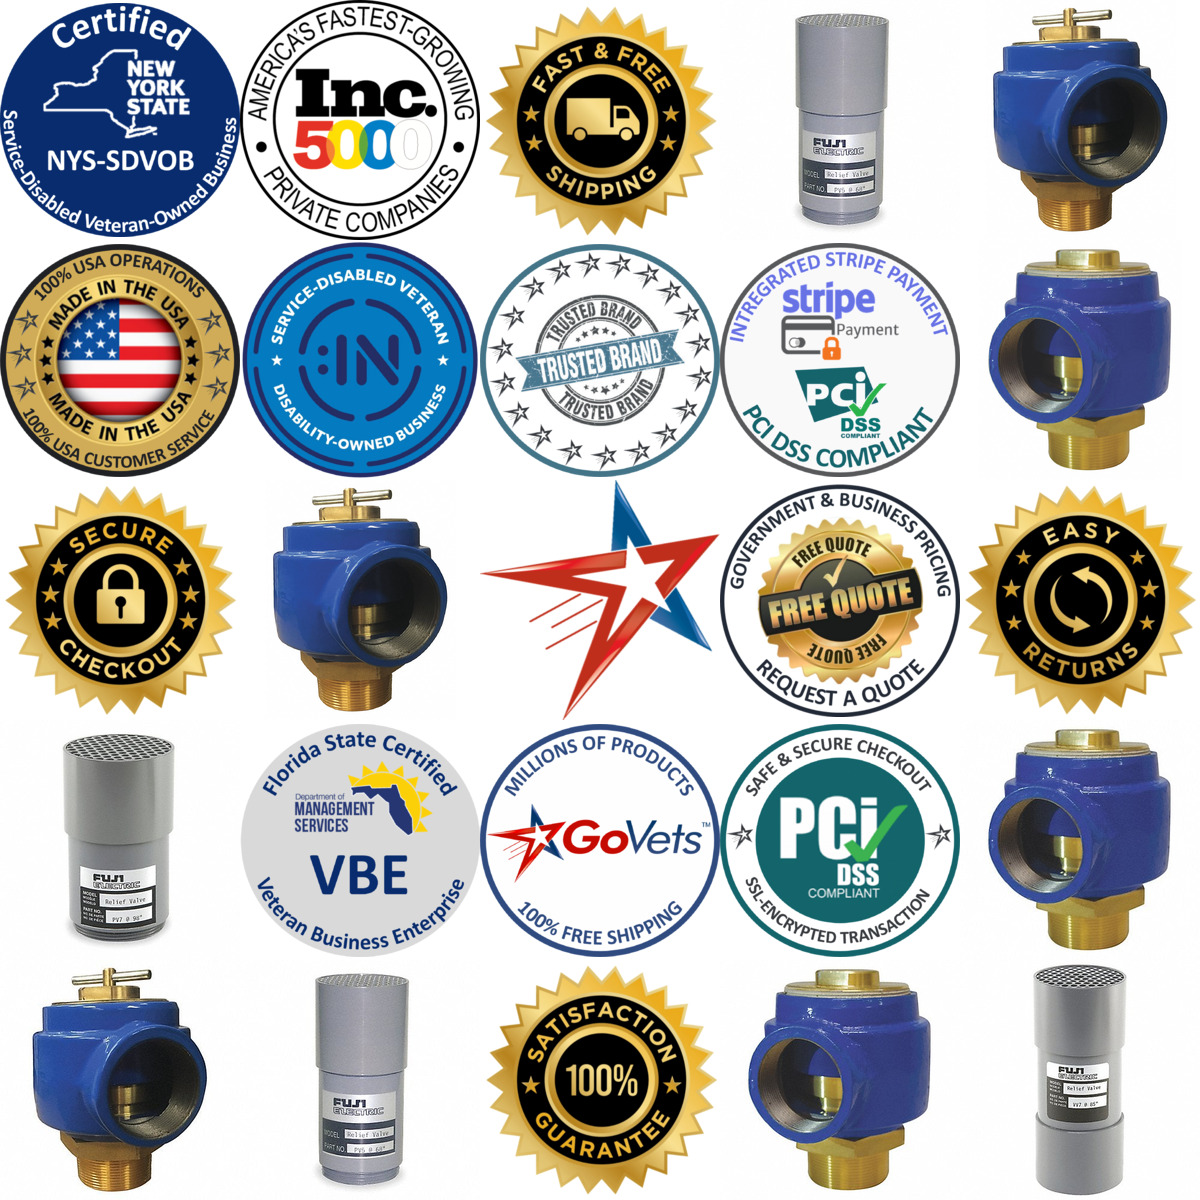 A selection of Regenerative Blower Pressure Relief Valves products on GoVets